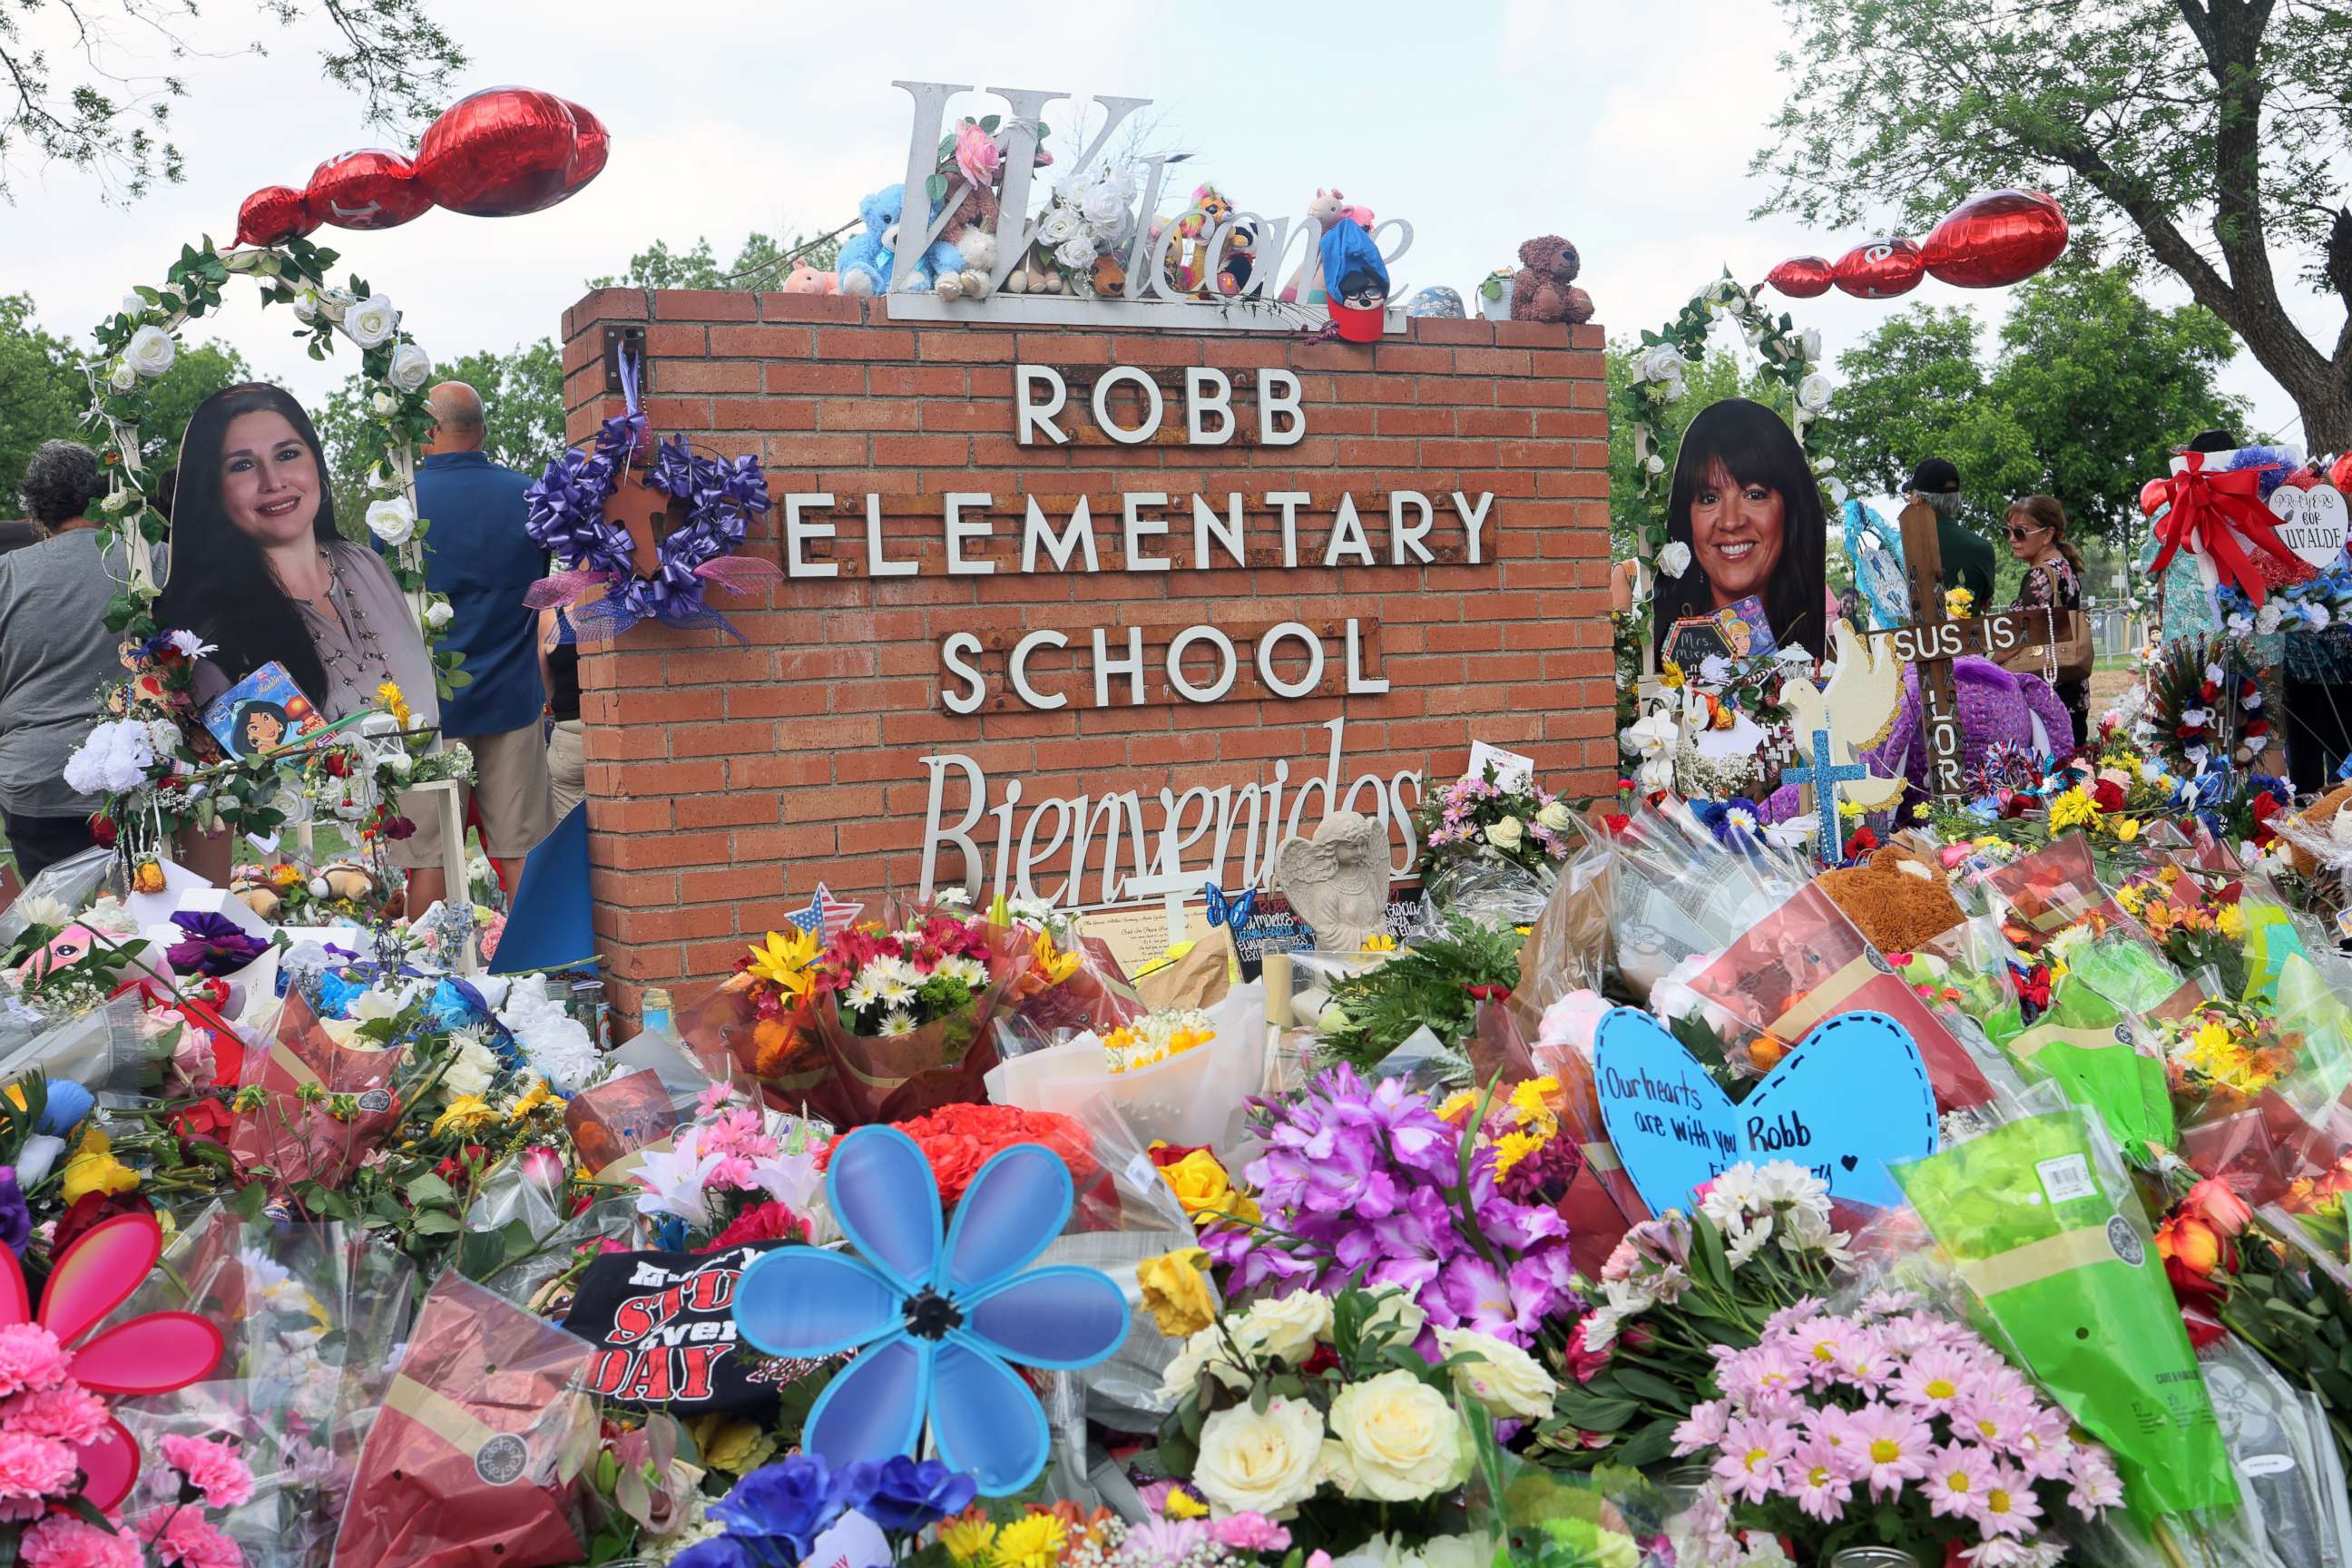 PHOTO: People visit a memorial for the 19 children and two adults killed on May 24th during a mass shooting at Robb Elementary School on May 30, 2022 in Uvalde, Texas.